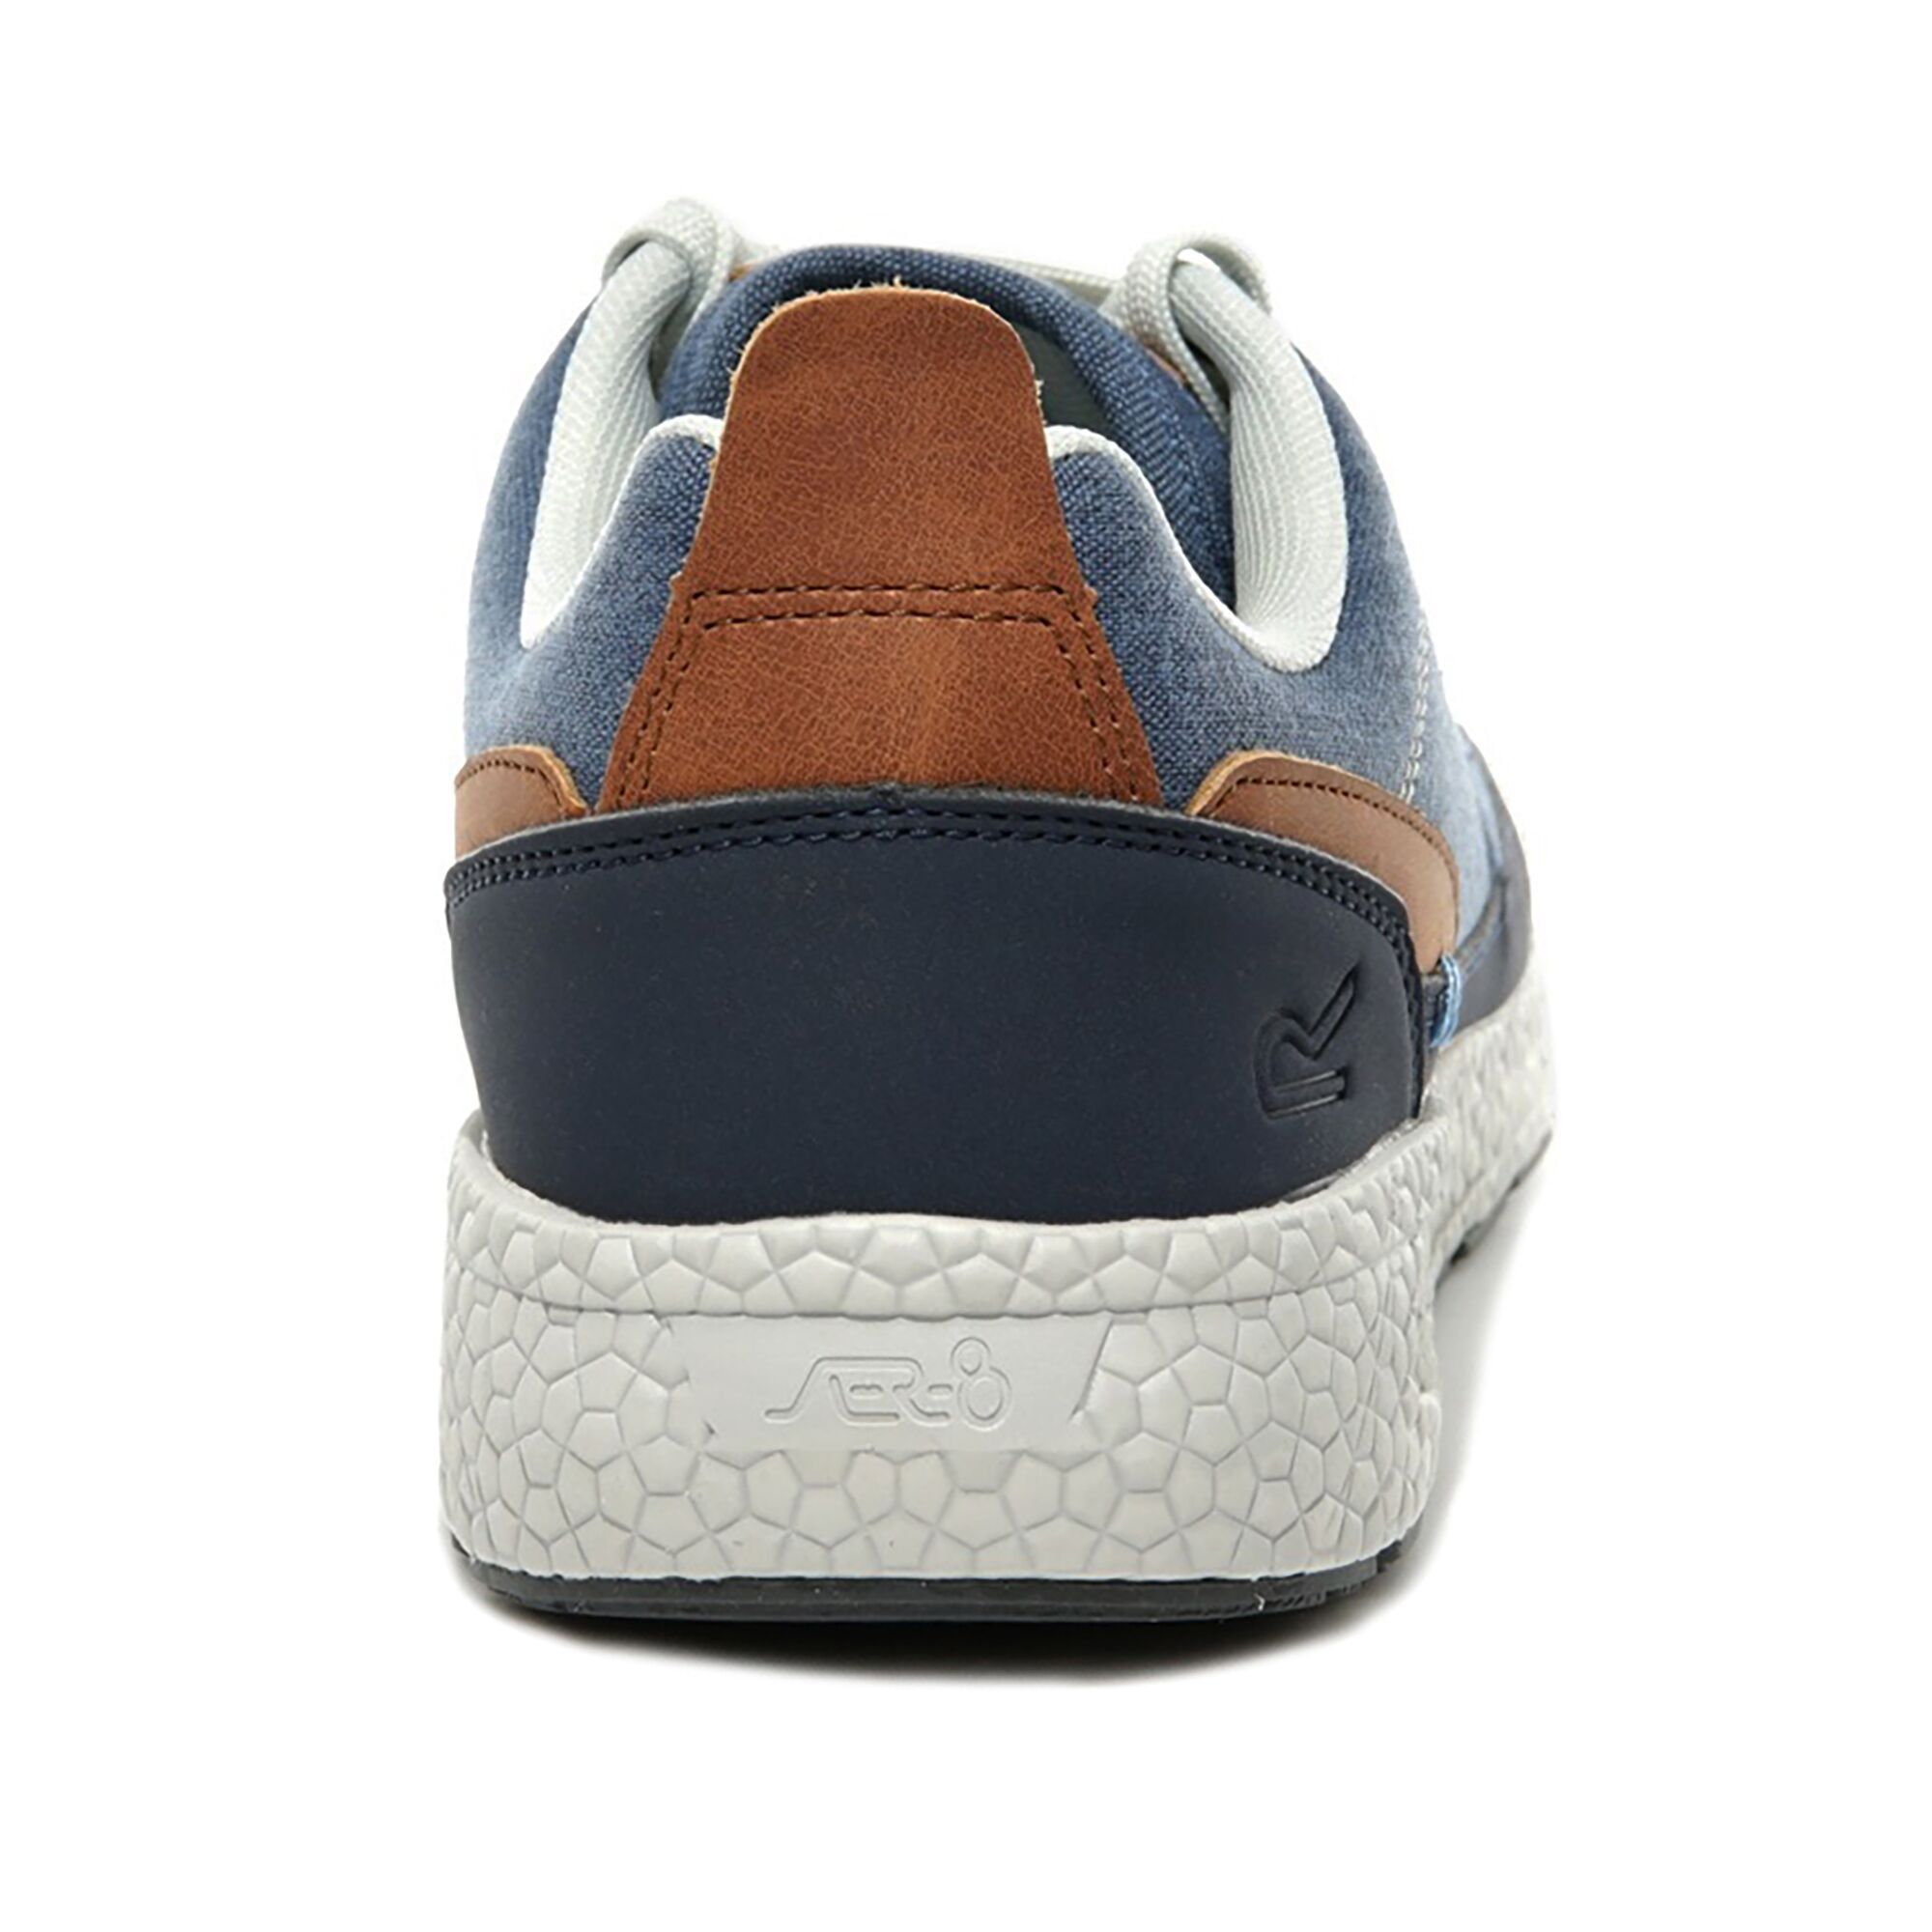 Material: 65% polyester, 35% polyurathane. Washed cotton canvas and PU upper. Die cut EVA footbed for underfoot comfort and support. AER-8 midsole improved compound with high resilience EVA provides lightweight, responsive and durable cushioning for all-day comfort. Hardwearing durable rubber outsole.